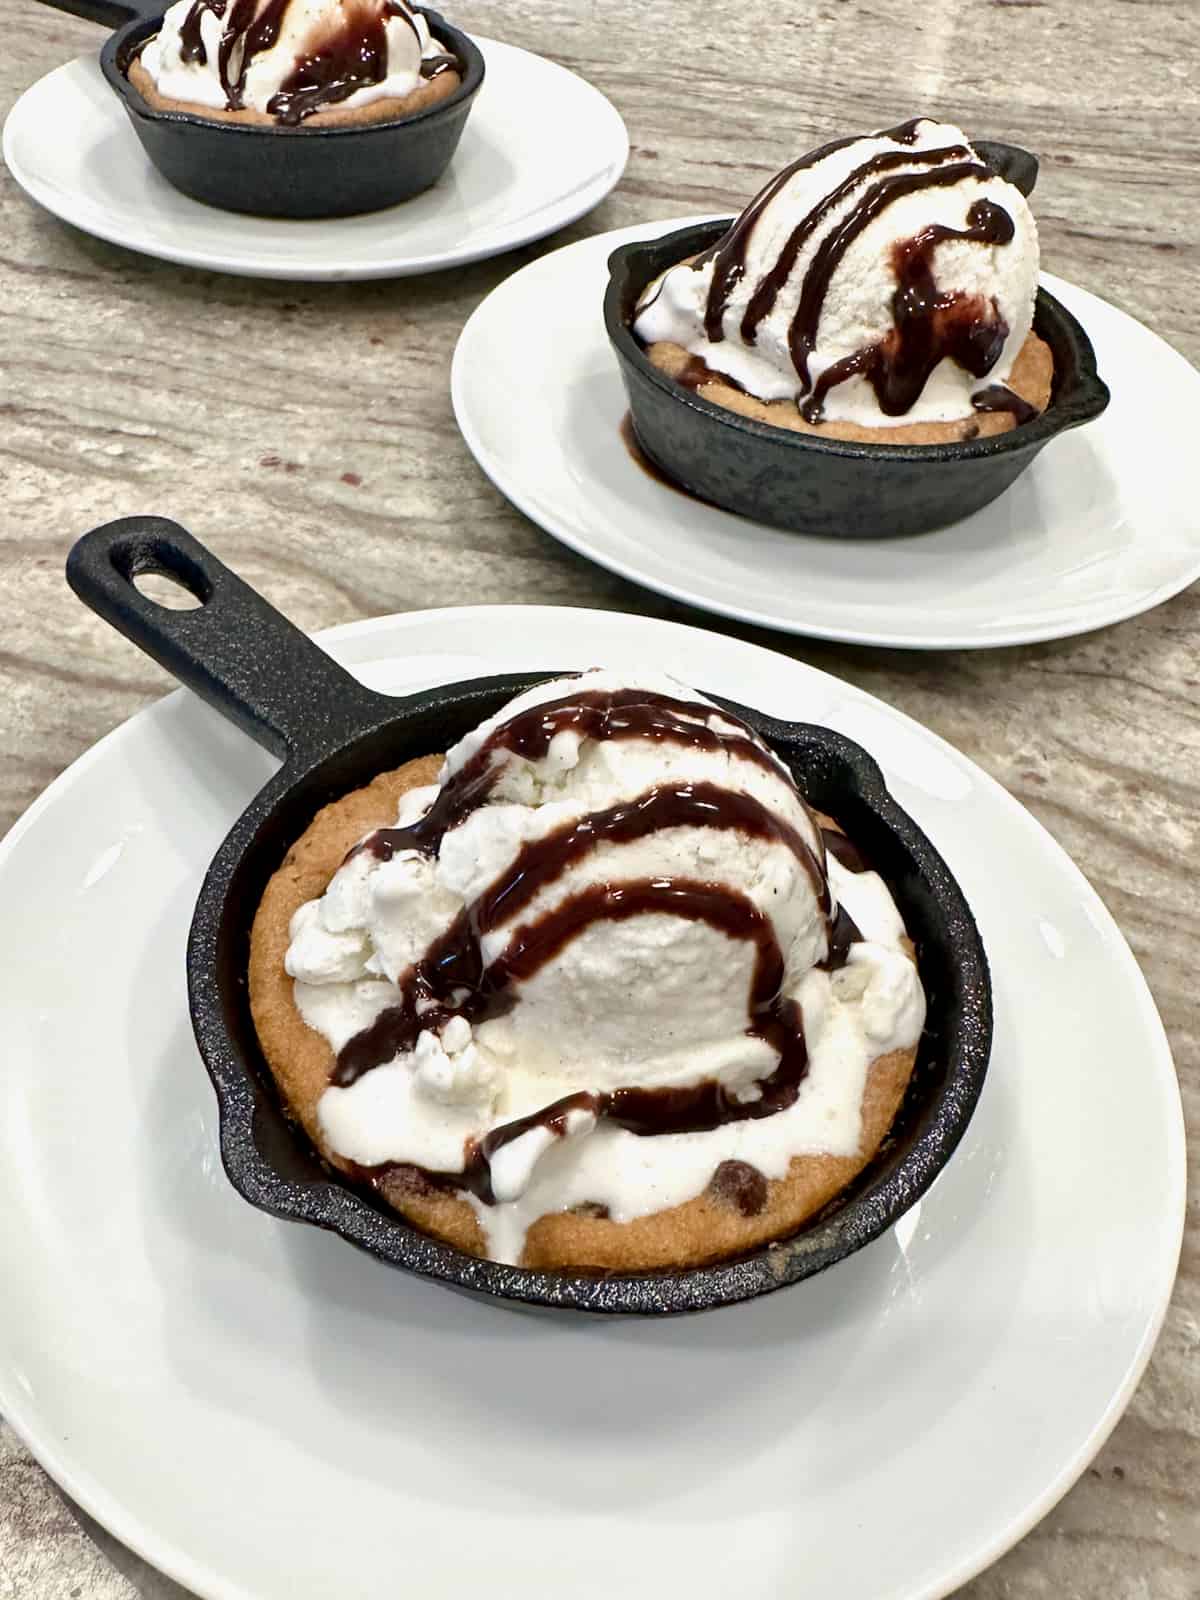 Chocolate chip cookies baked into three mini skillets and topped with ice cream and chocolate sauce.